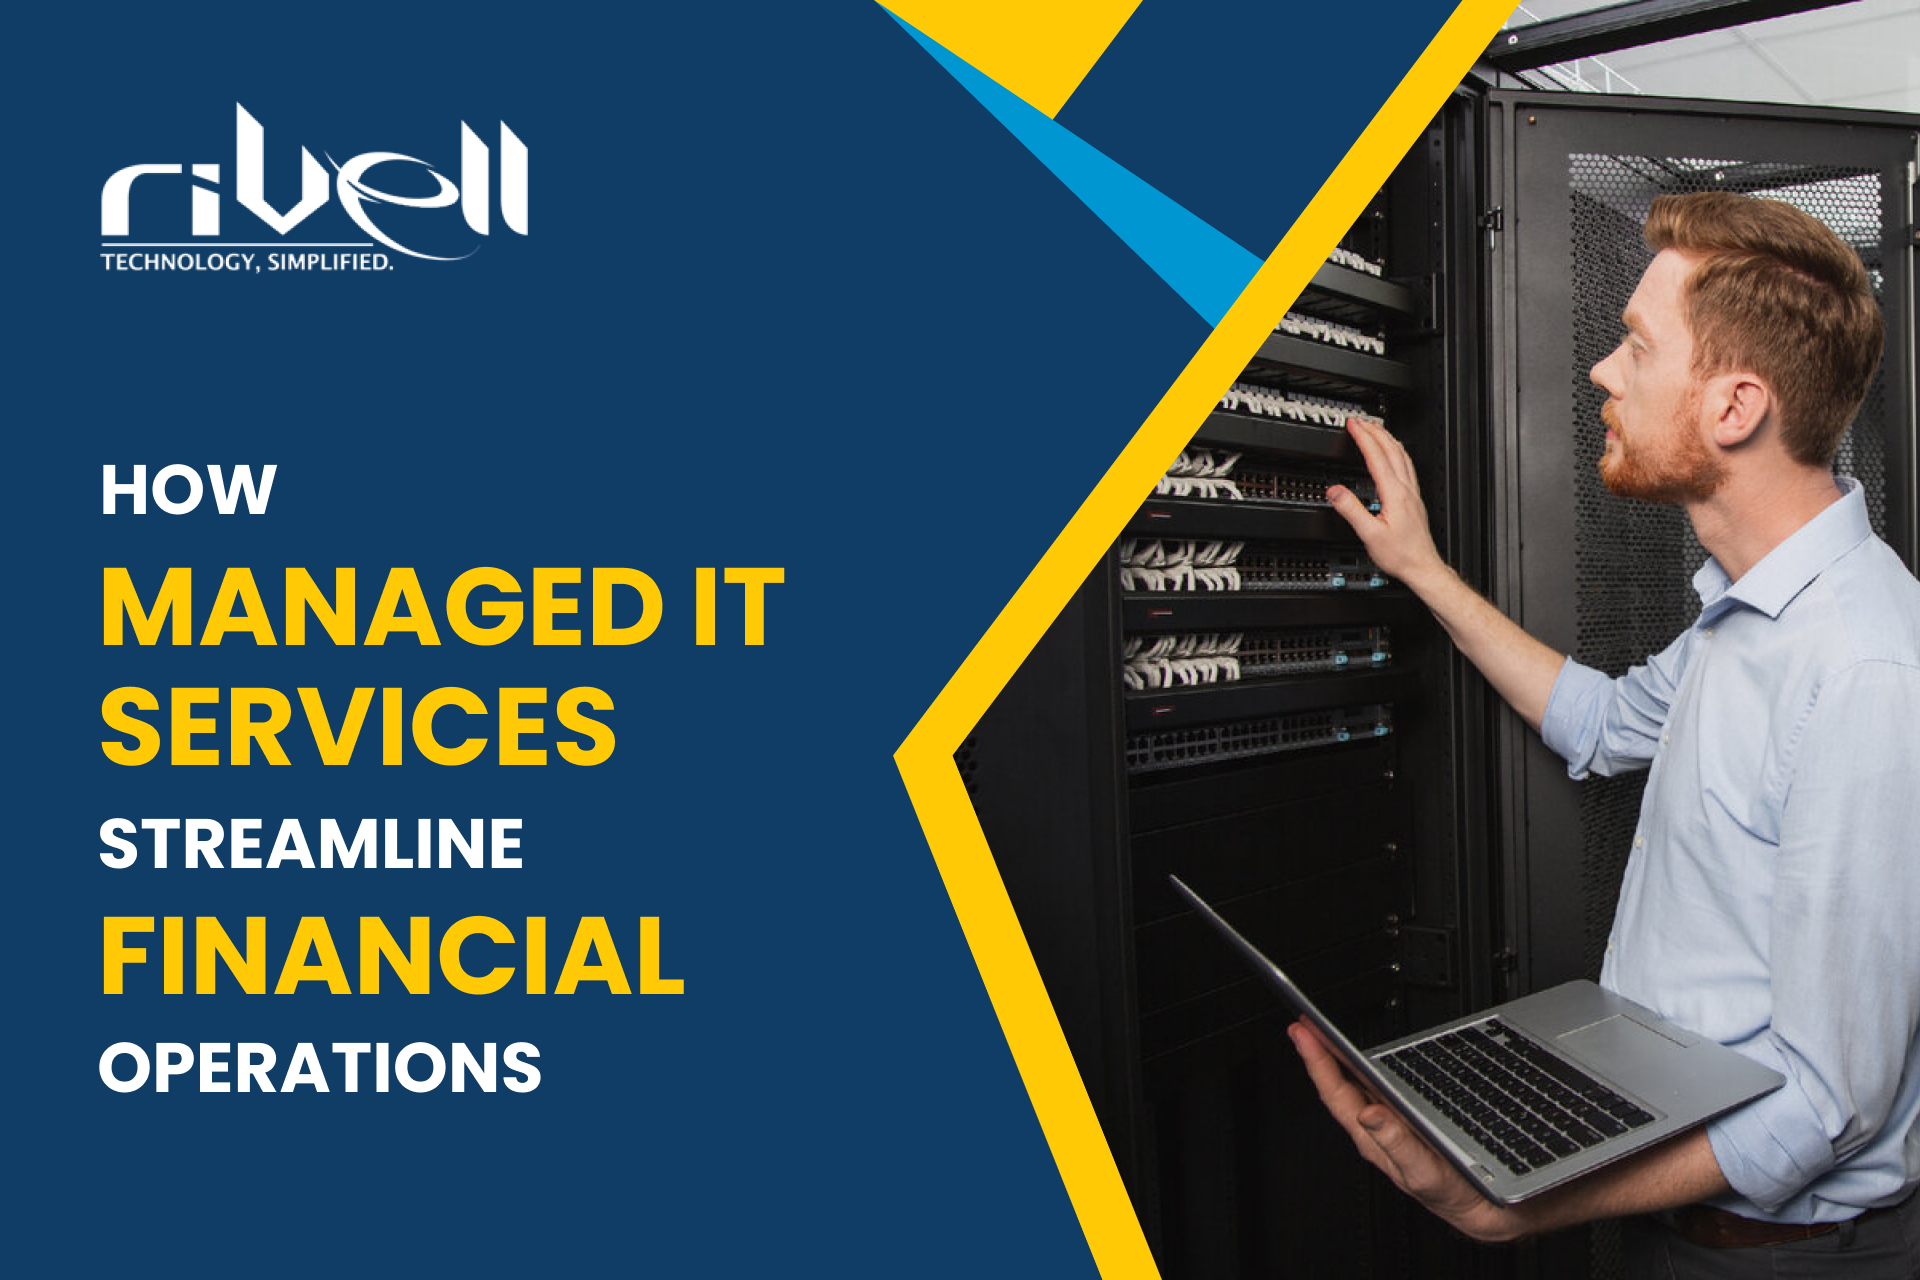 How Managed IT Services Streamline Financial Operations